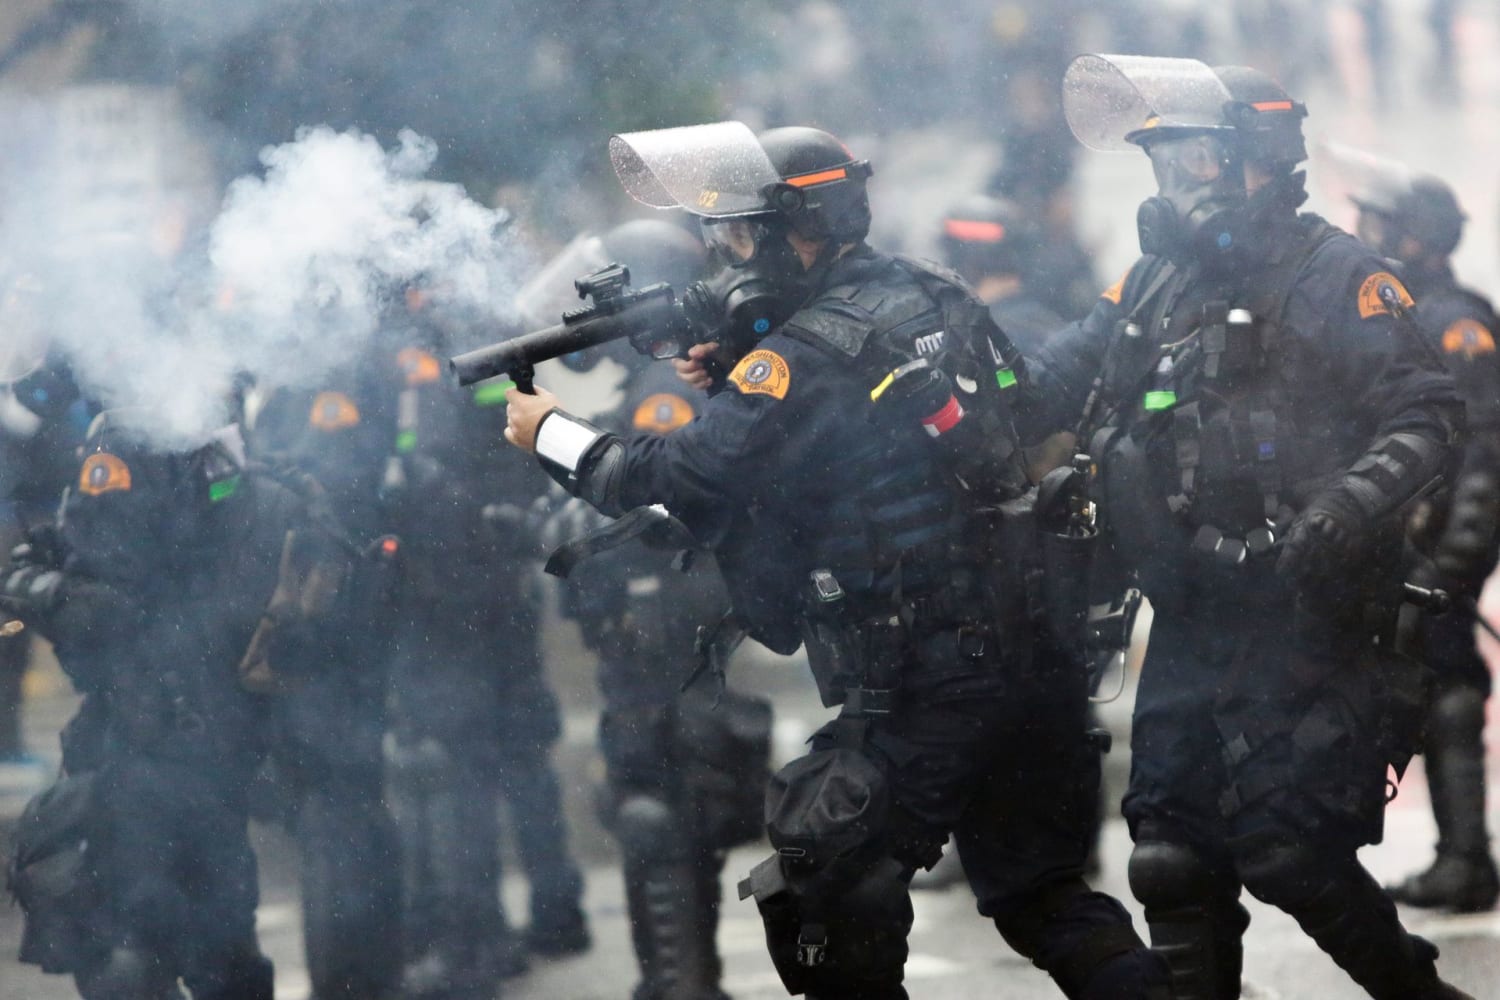 Amnesty International: U.S. police must end militarized response to protests